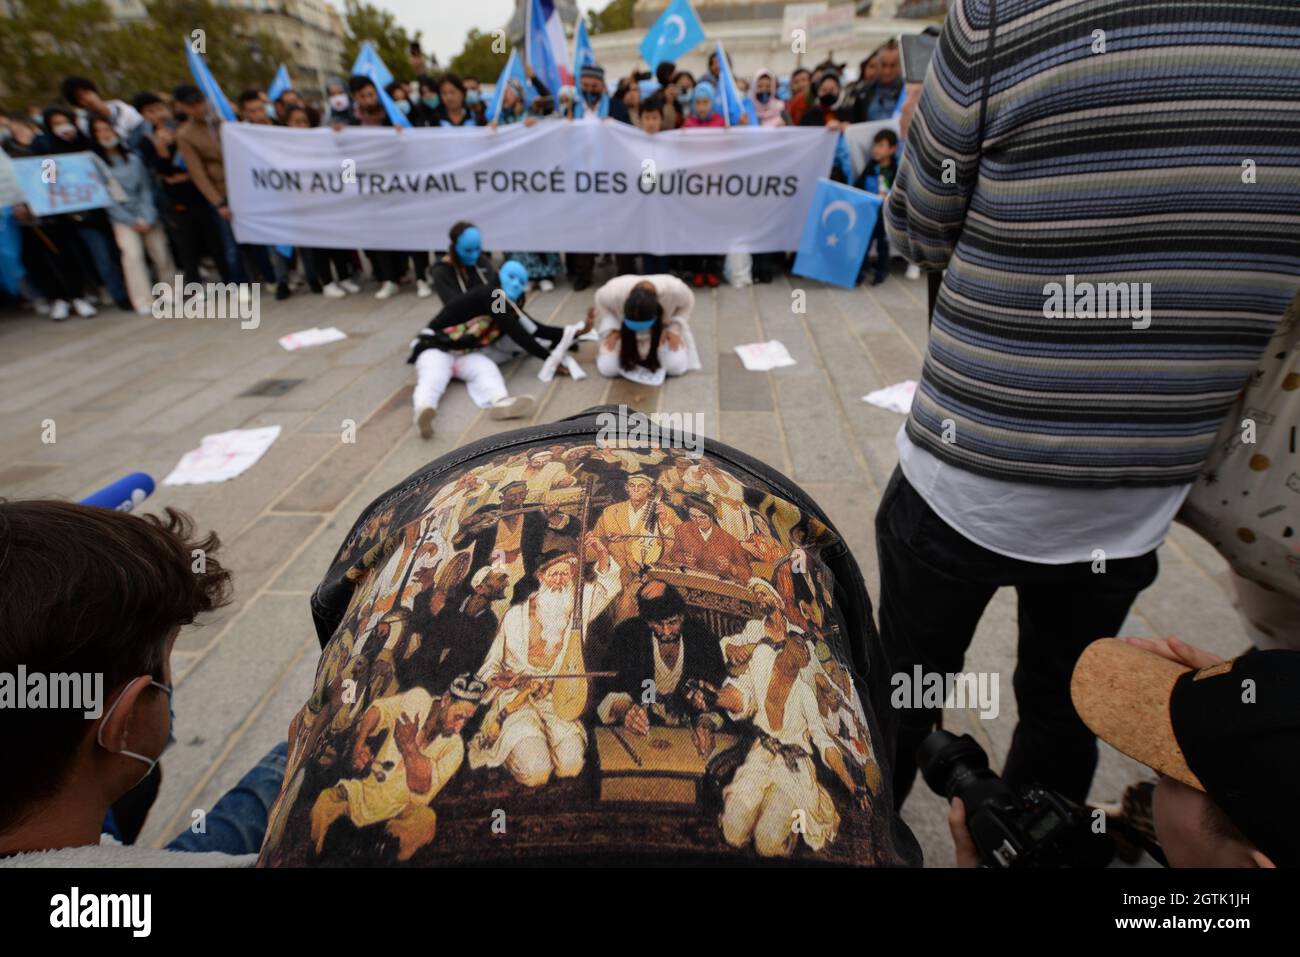 Demonstration against the genocide of the Uyghur people in China. Several hundred people, including several MPs, march from the Place de la Bastille Stock Photo